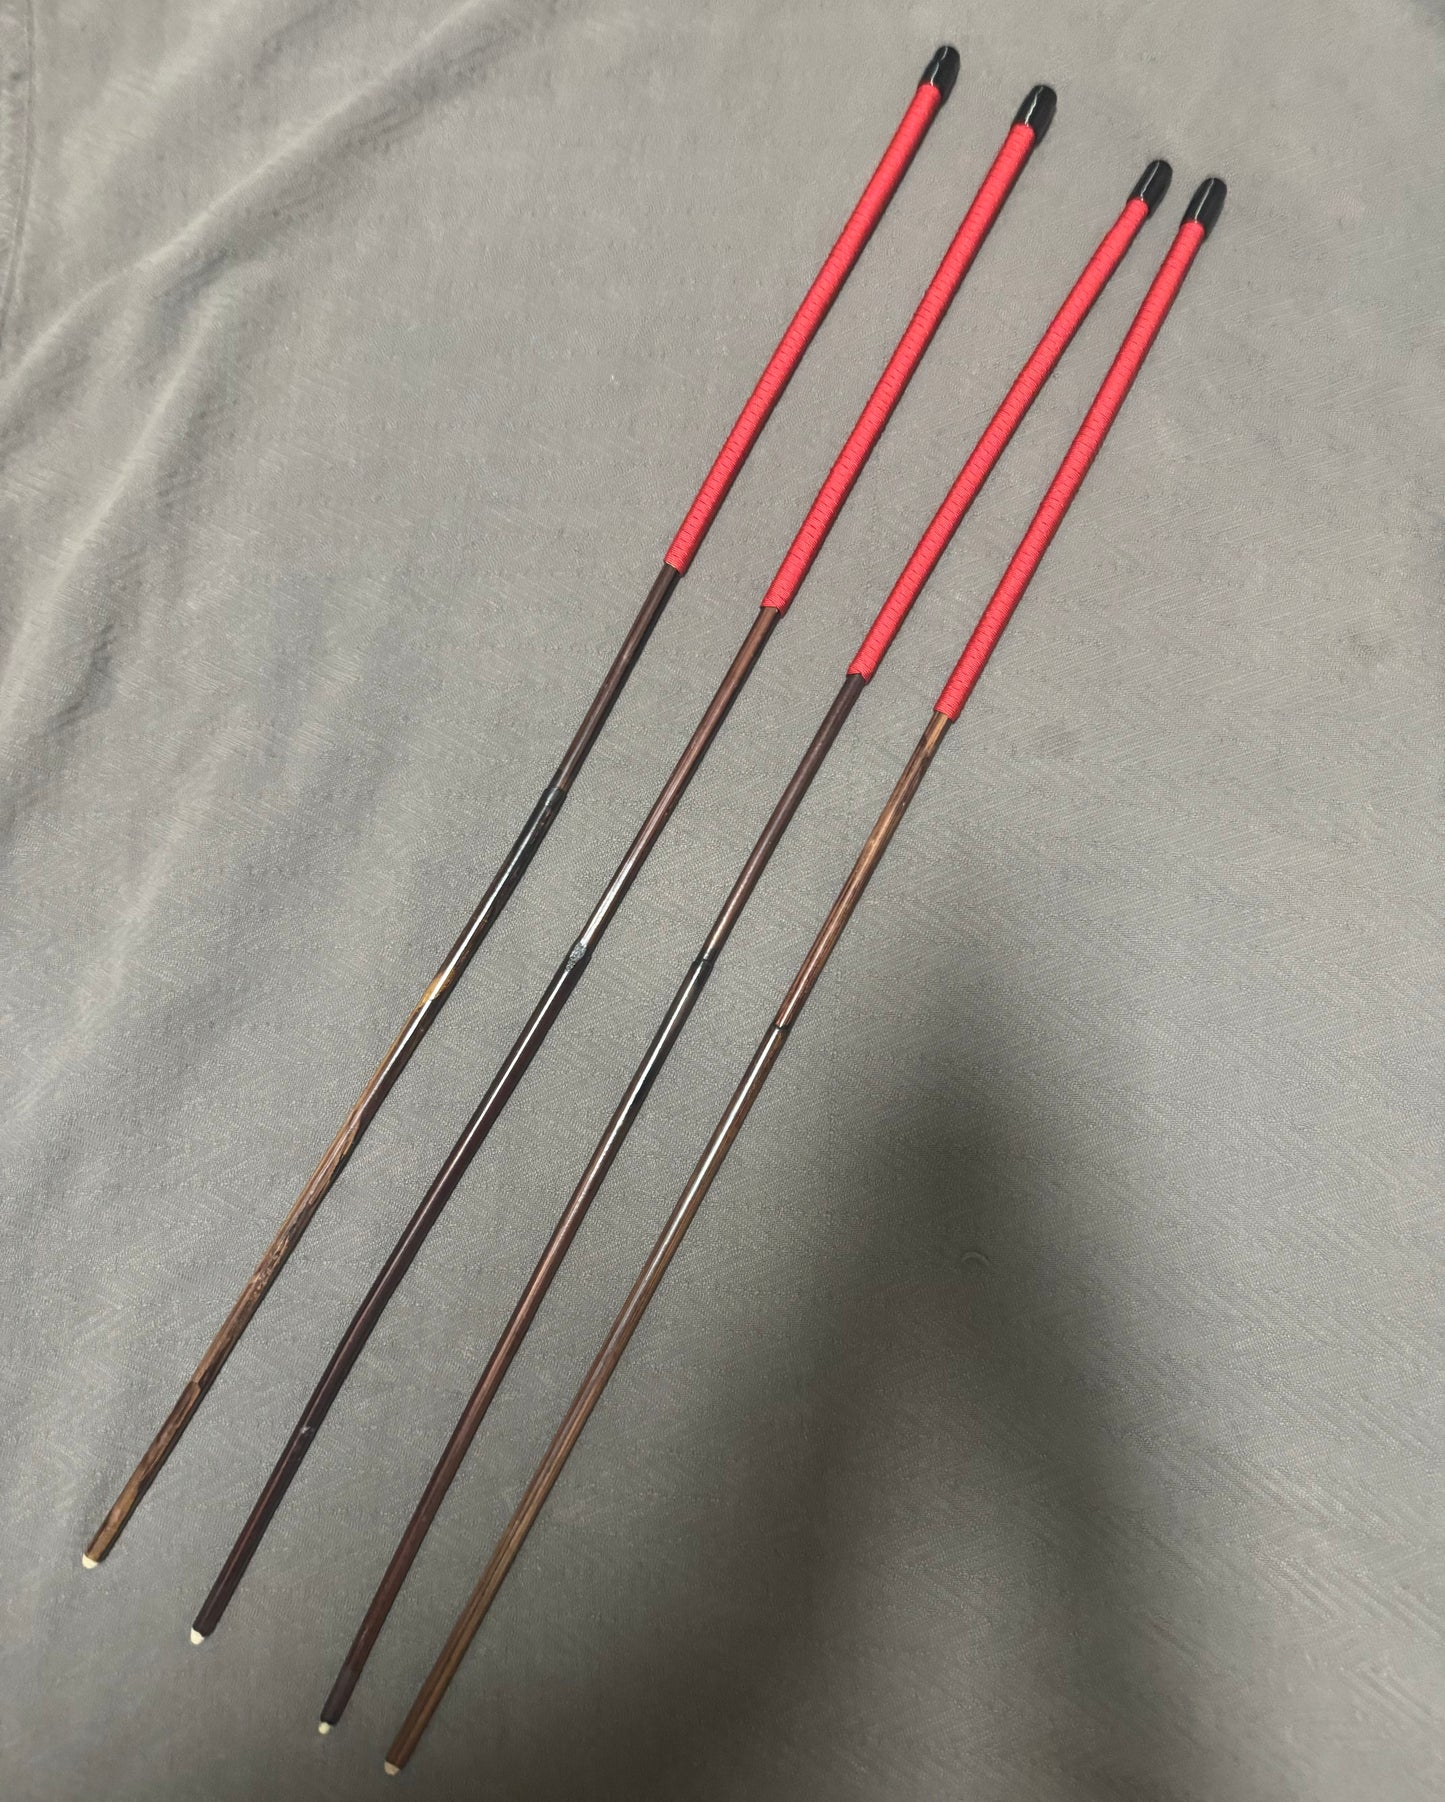 Set of 4 Whippy Swishy Thin Smoked Dragon Canes / Falaka Canes - 90 cms L & 8 - 10 mm D - Imperial Red Paracord Handles - Englishvice Canes